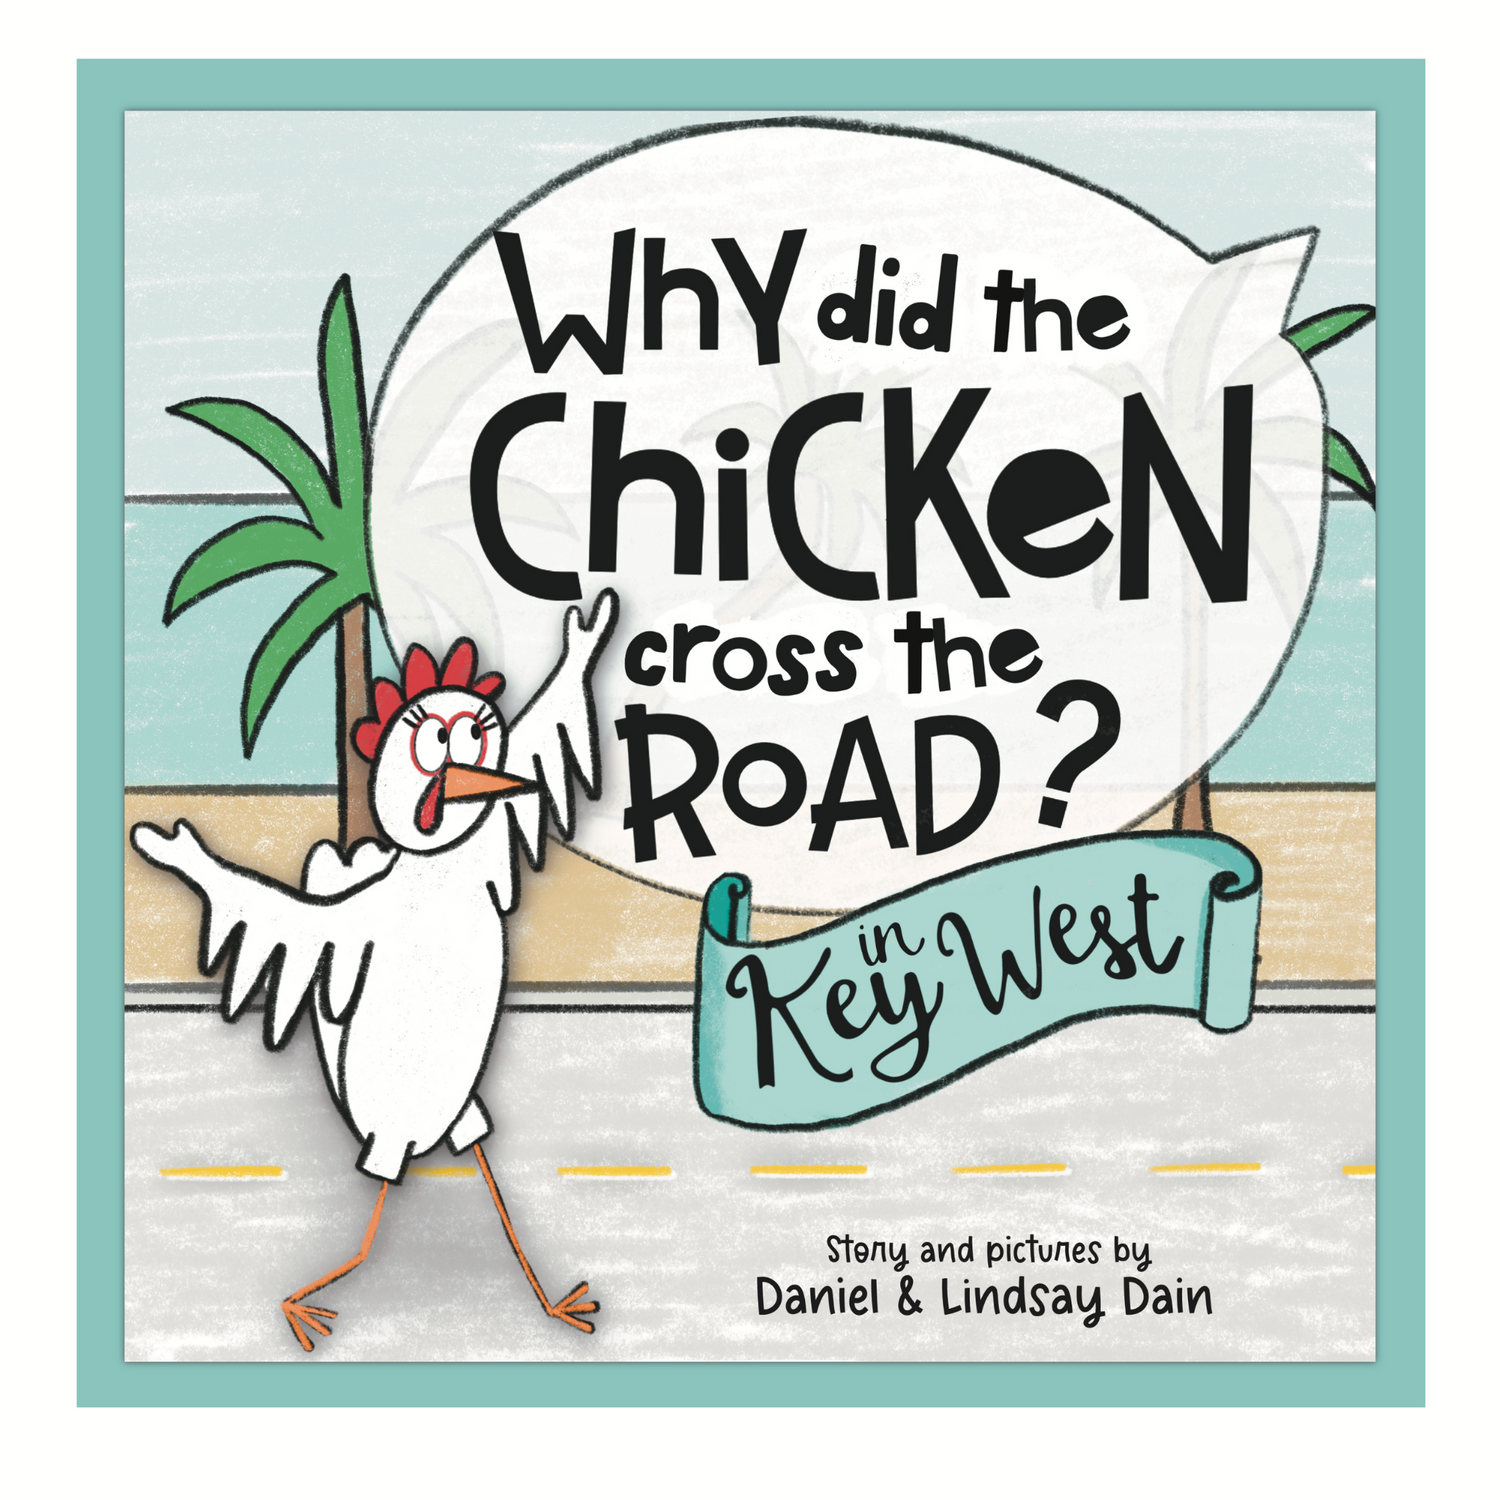 Front cover image of self published author and illustrator Lindsay Dain's book called "Why Did the Chicken Cross the Road in Key West?" created and available through Amazon KDP and Kindle Direct Pubilshing